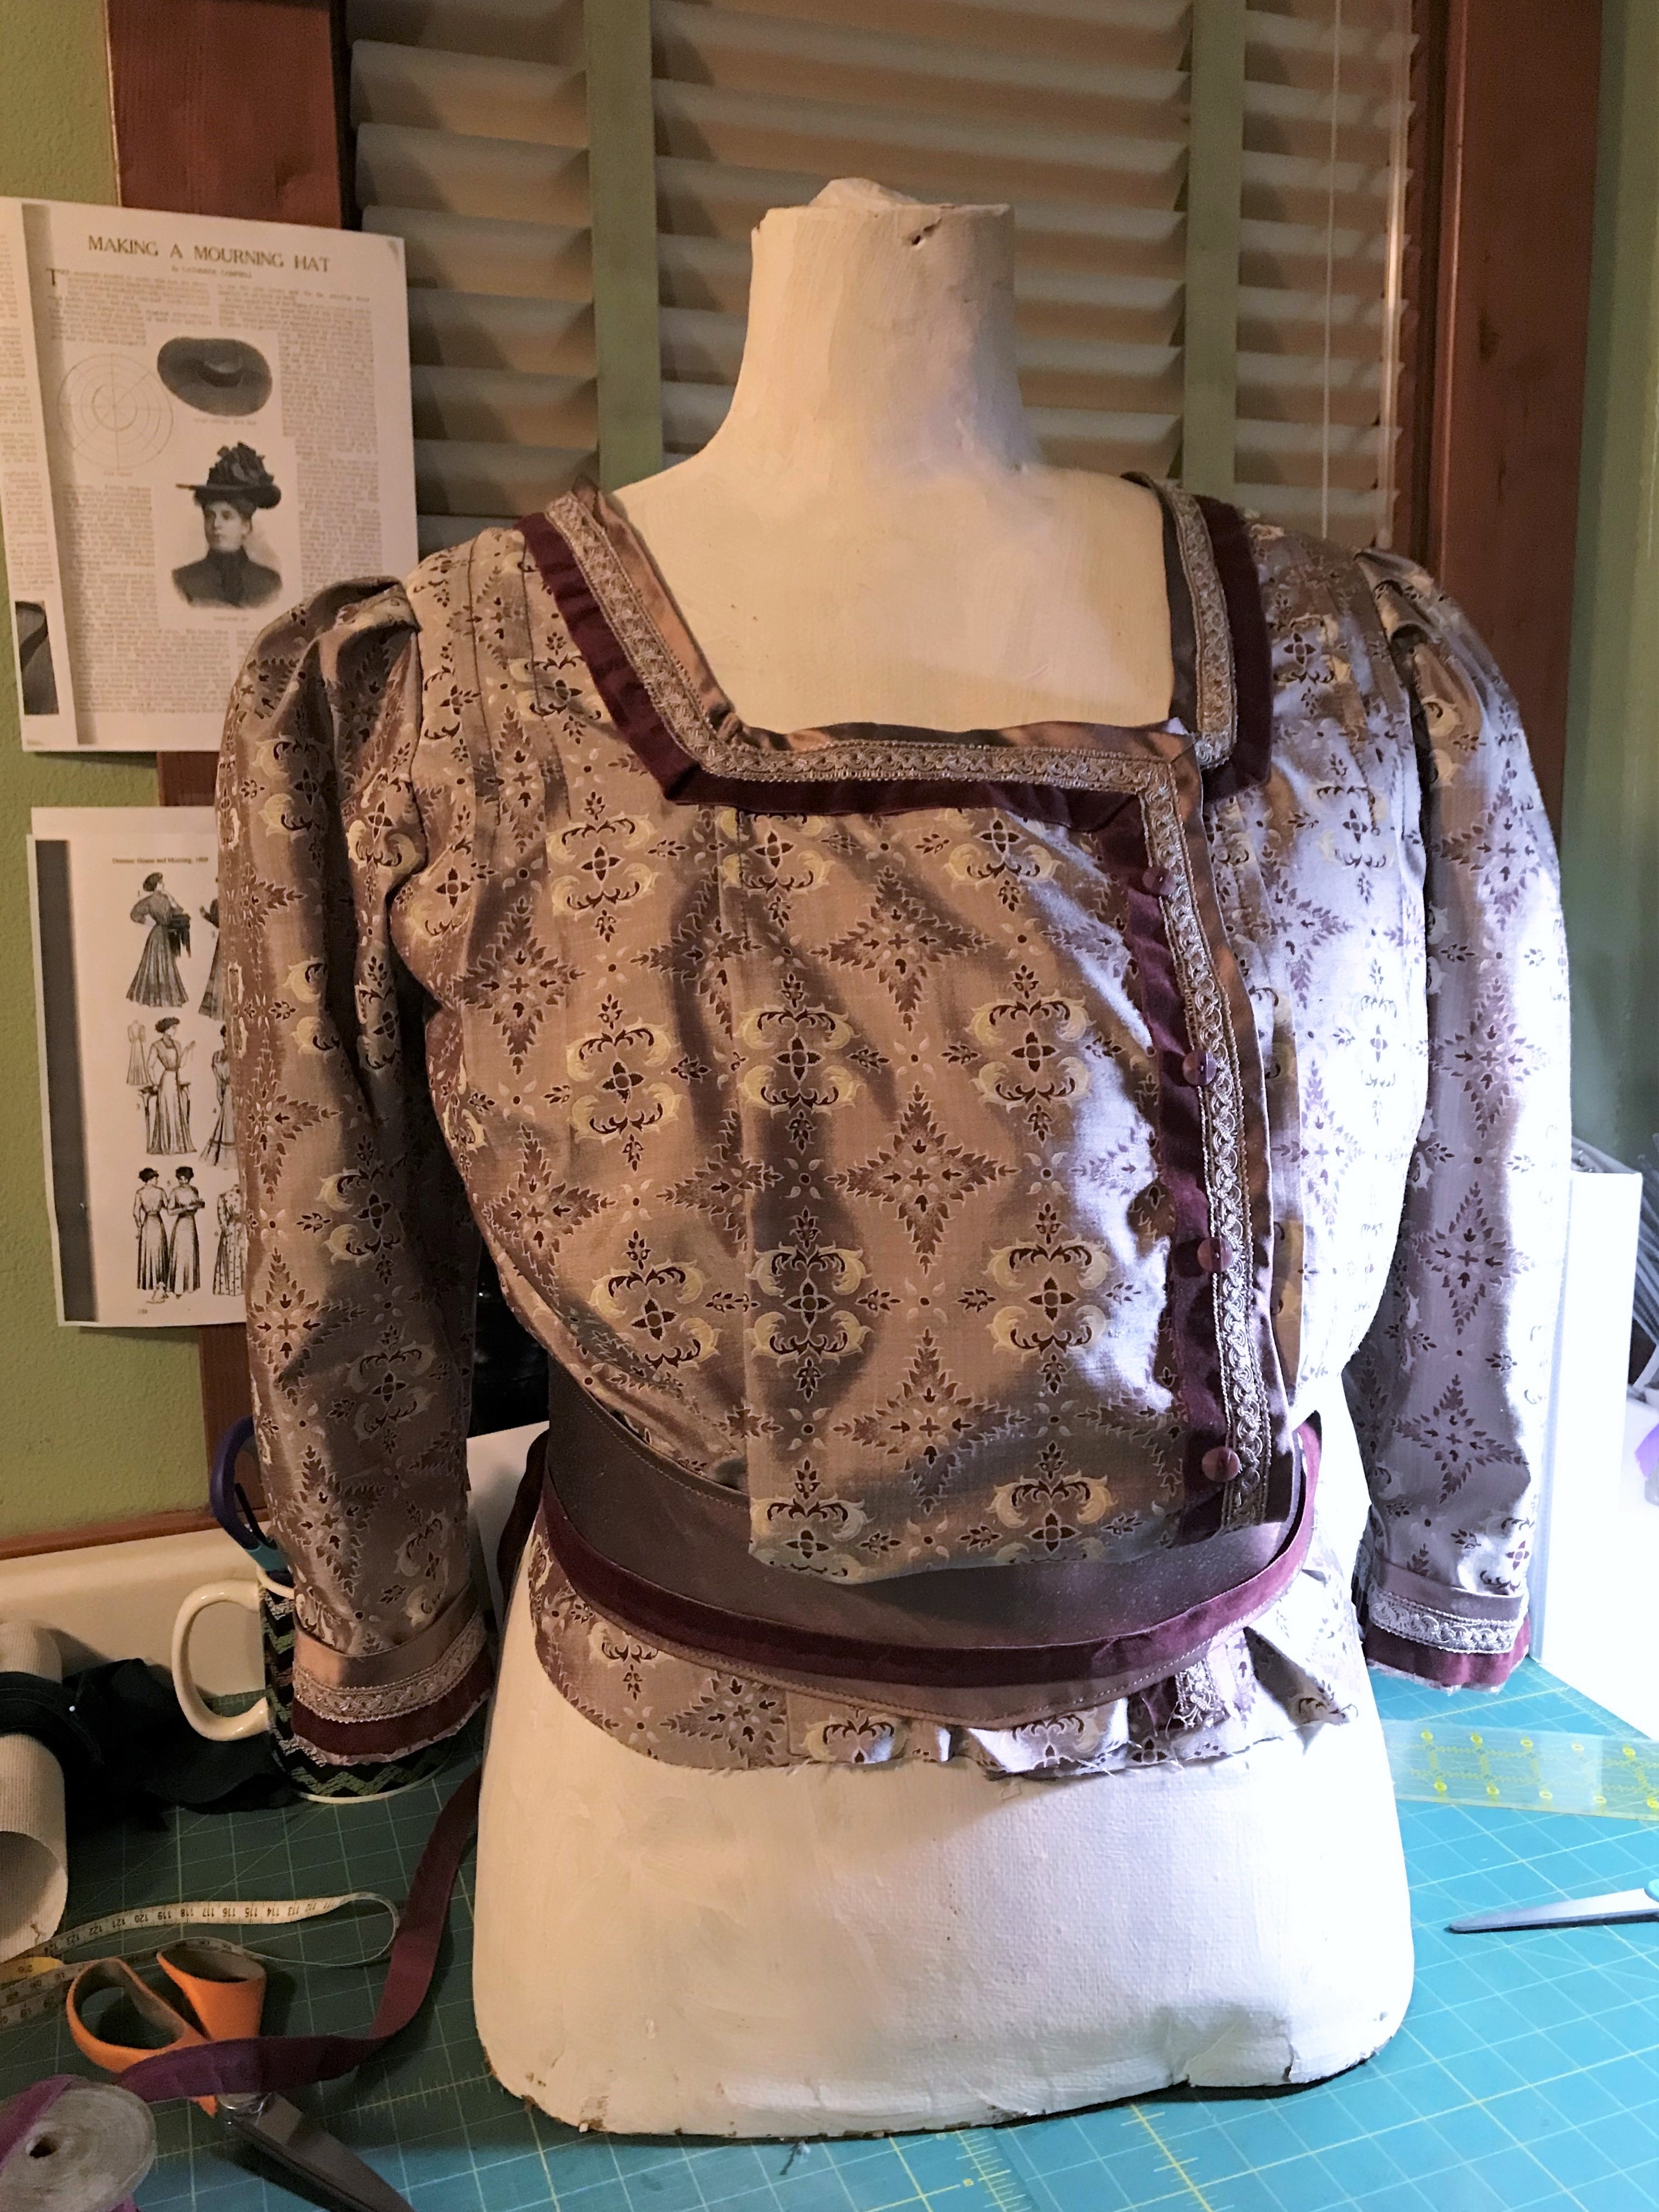 The finished Party Waist and sash on the mannequin